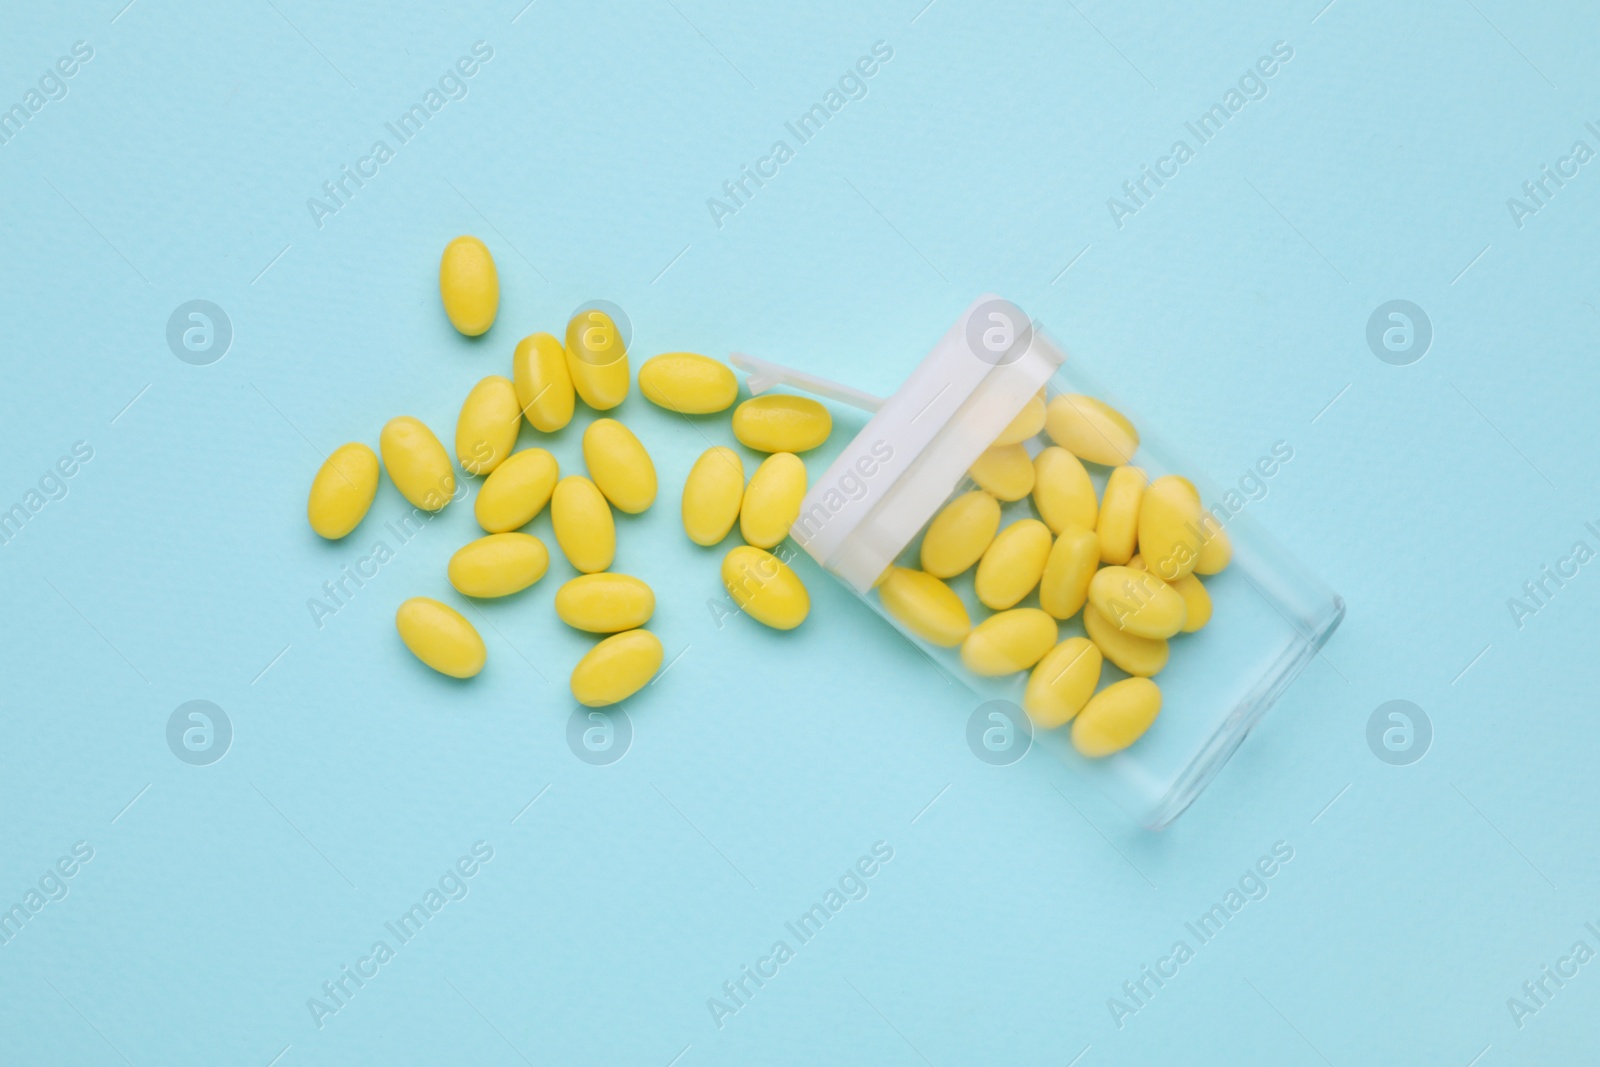 Photo of Tasty yellow dragee candies and container on light blue background, flat lay